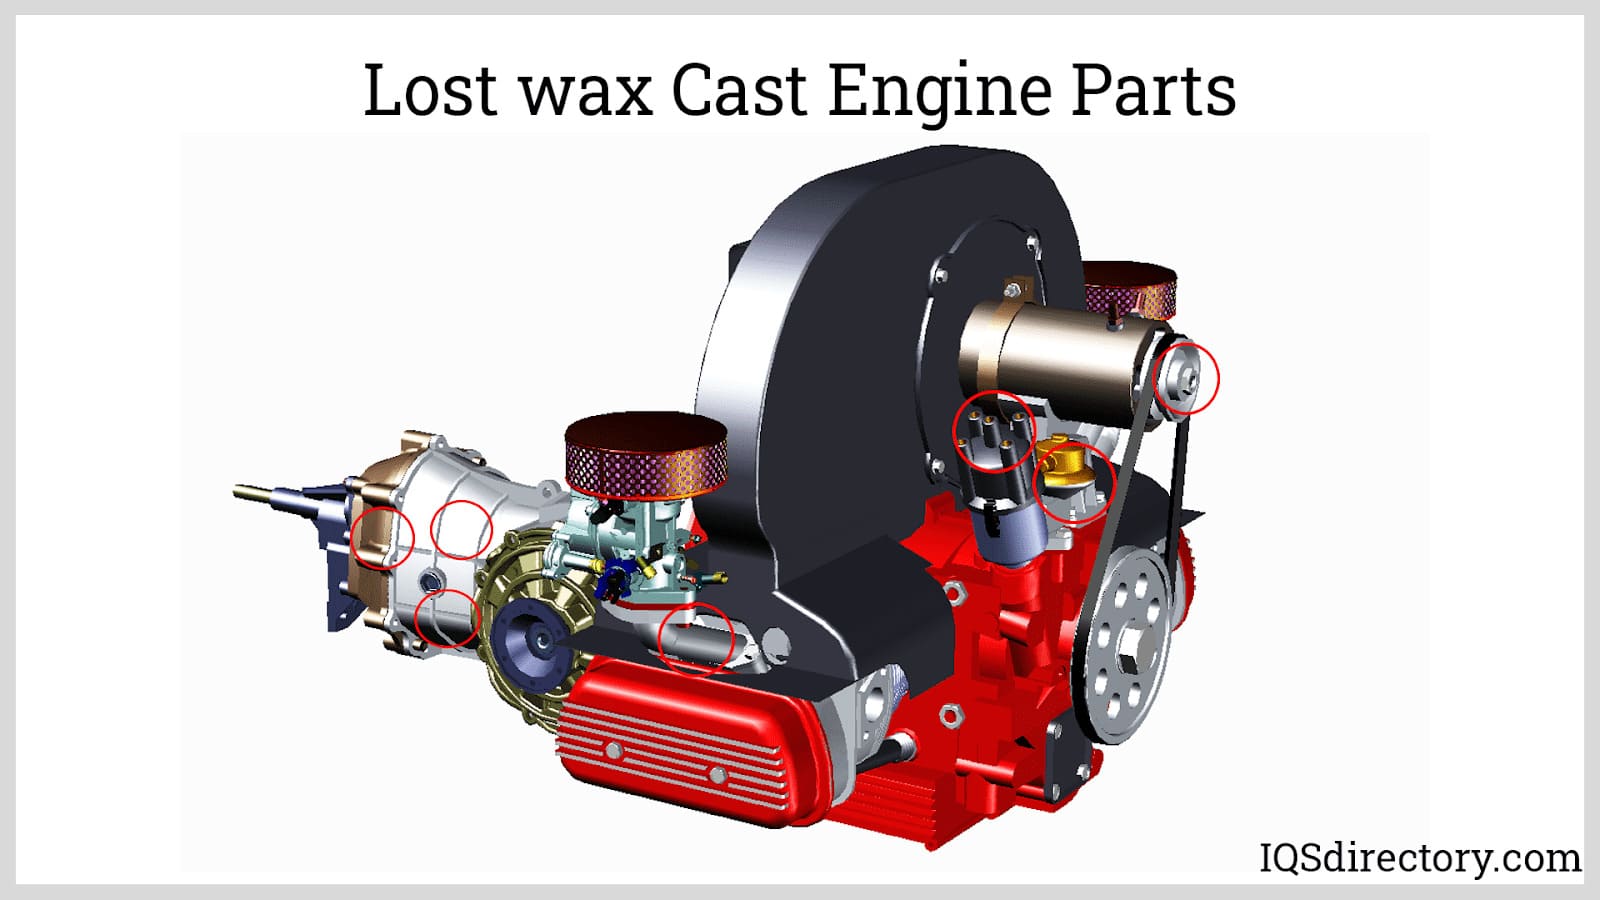 Lost wax Cast Engine Parts